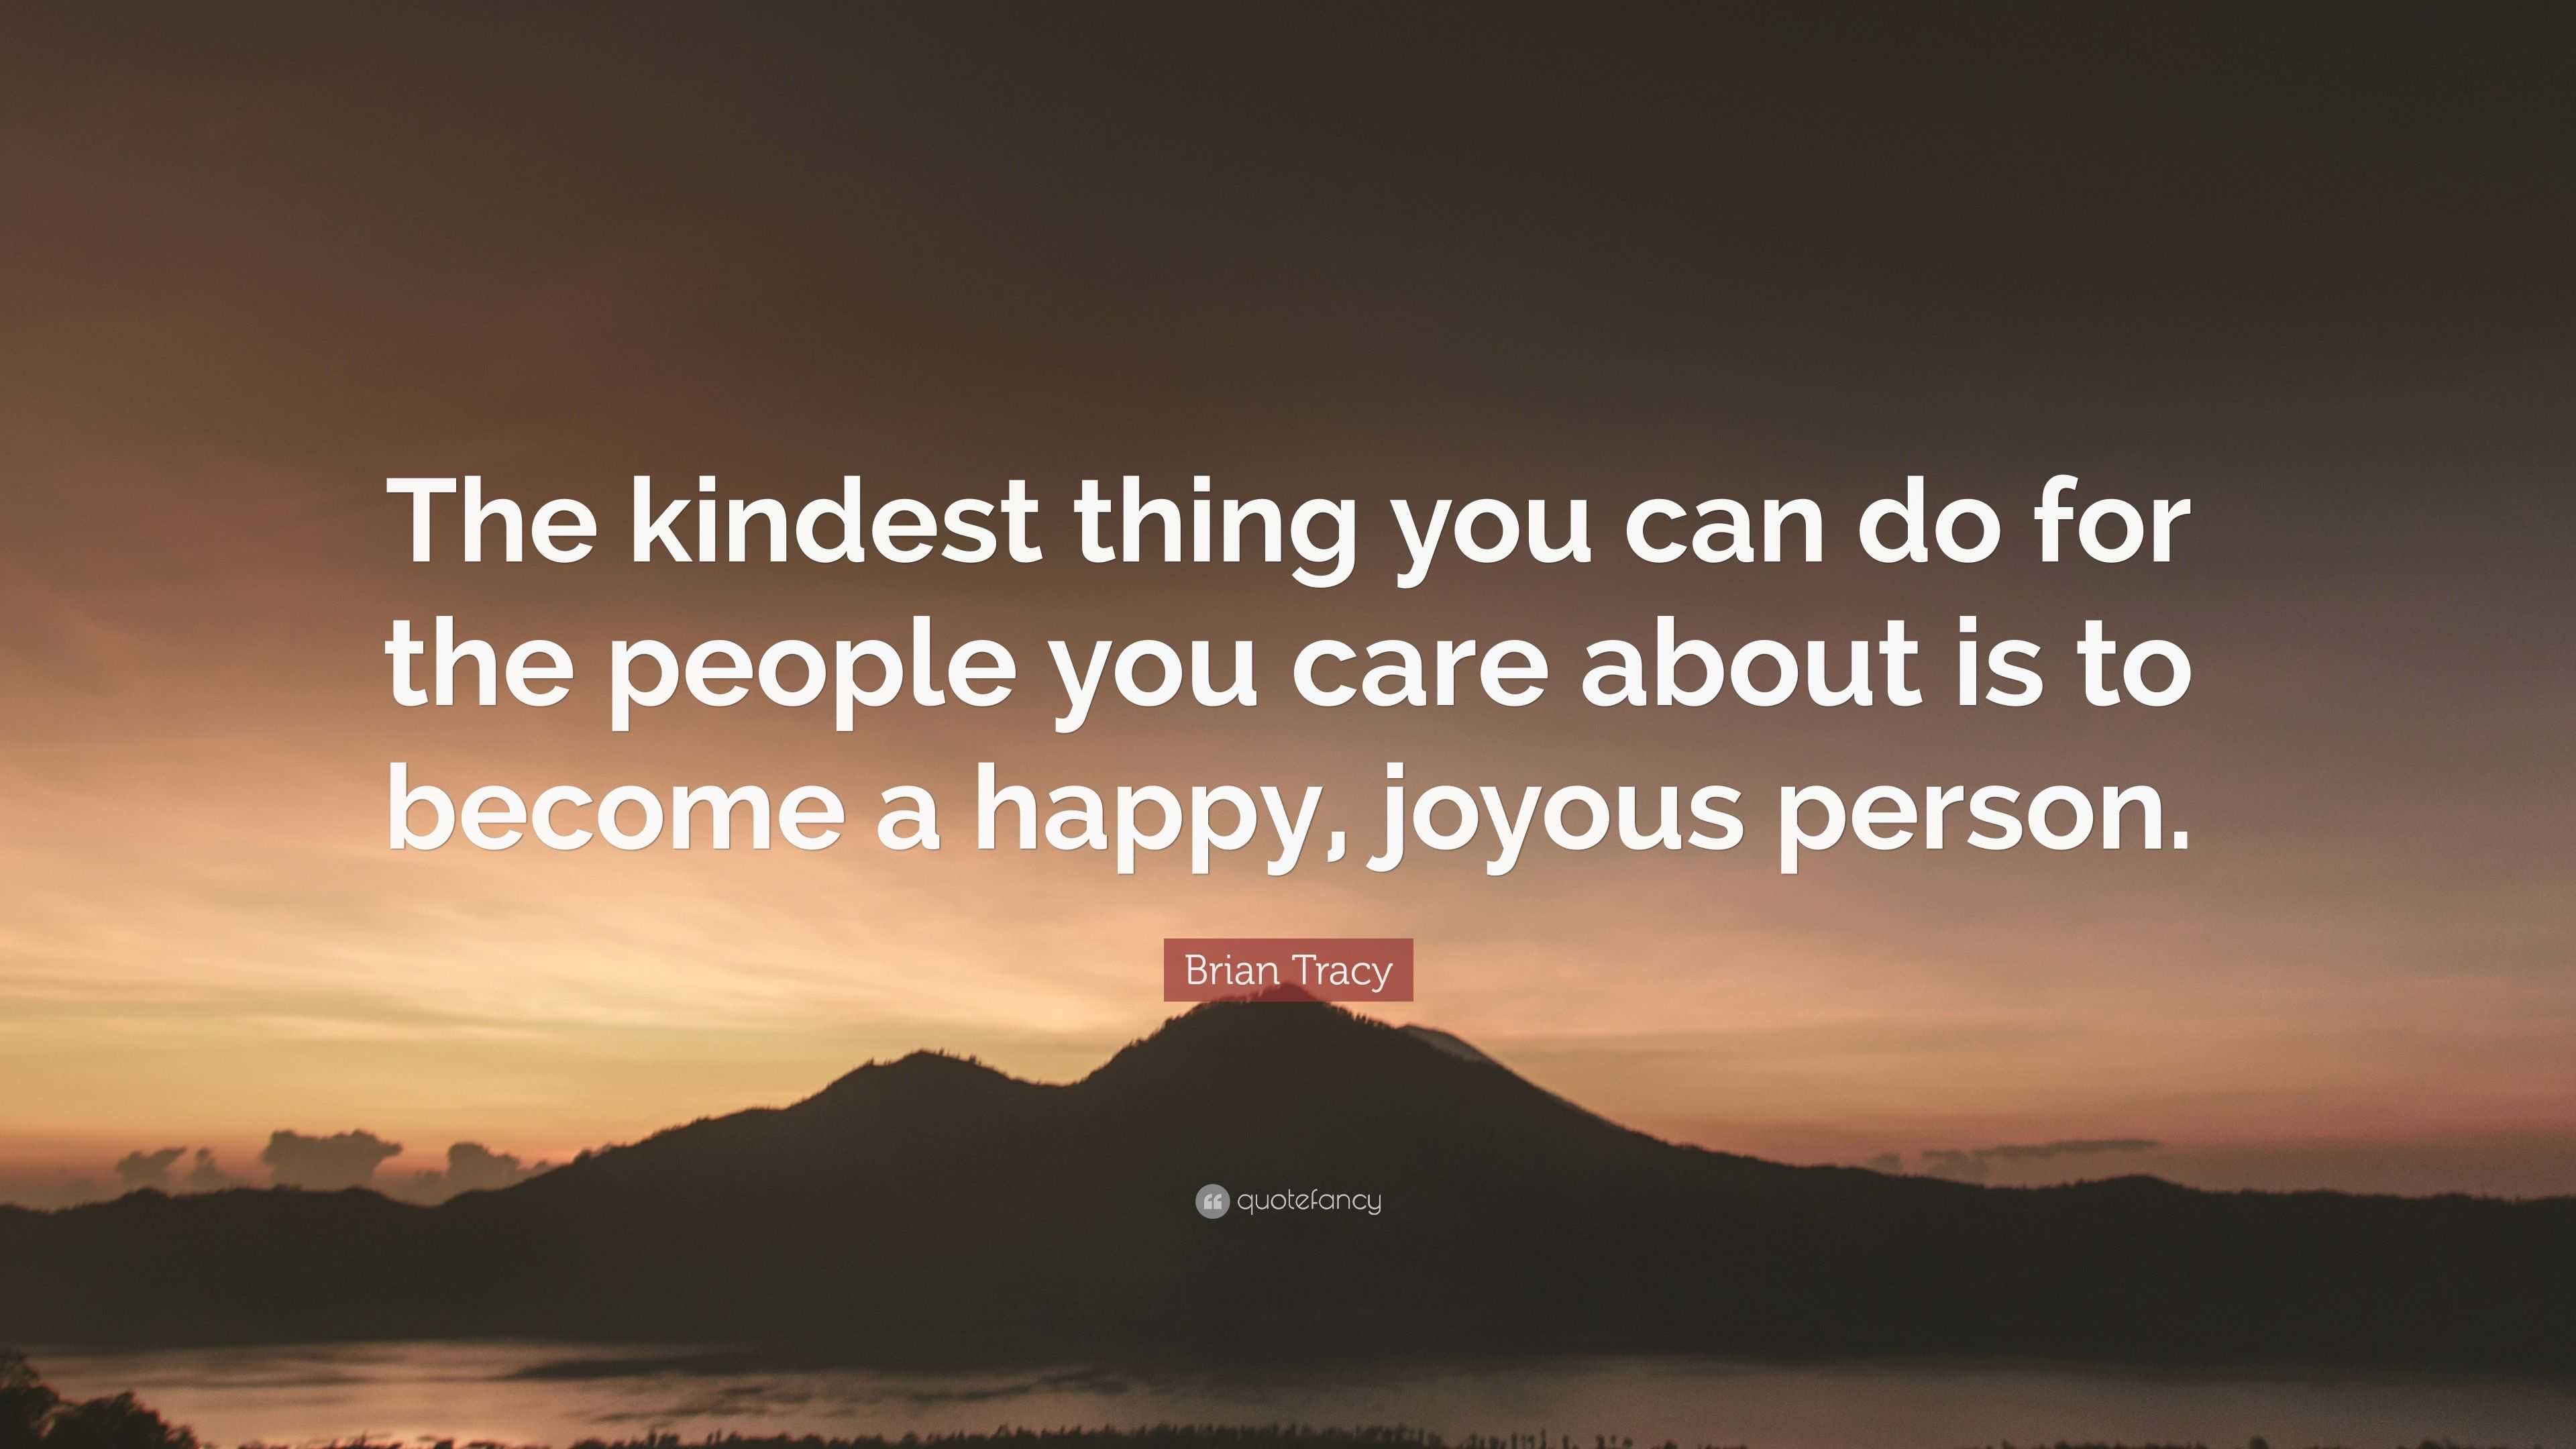 Brian Tracy Quote: “The kindest thing you can do for the people you ...